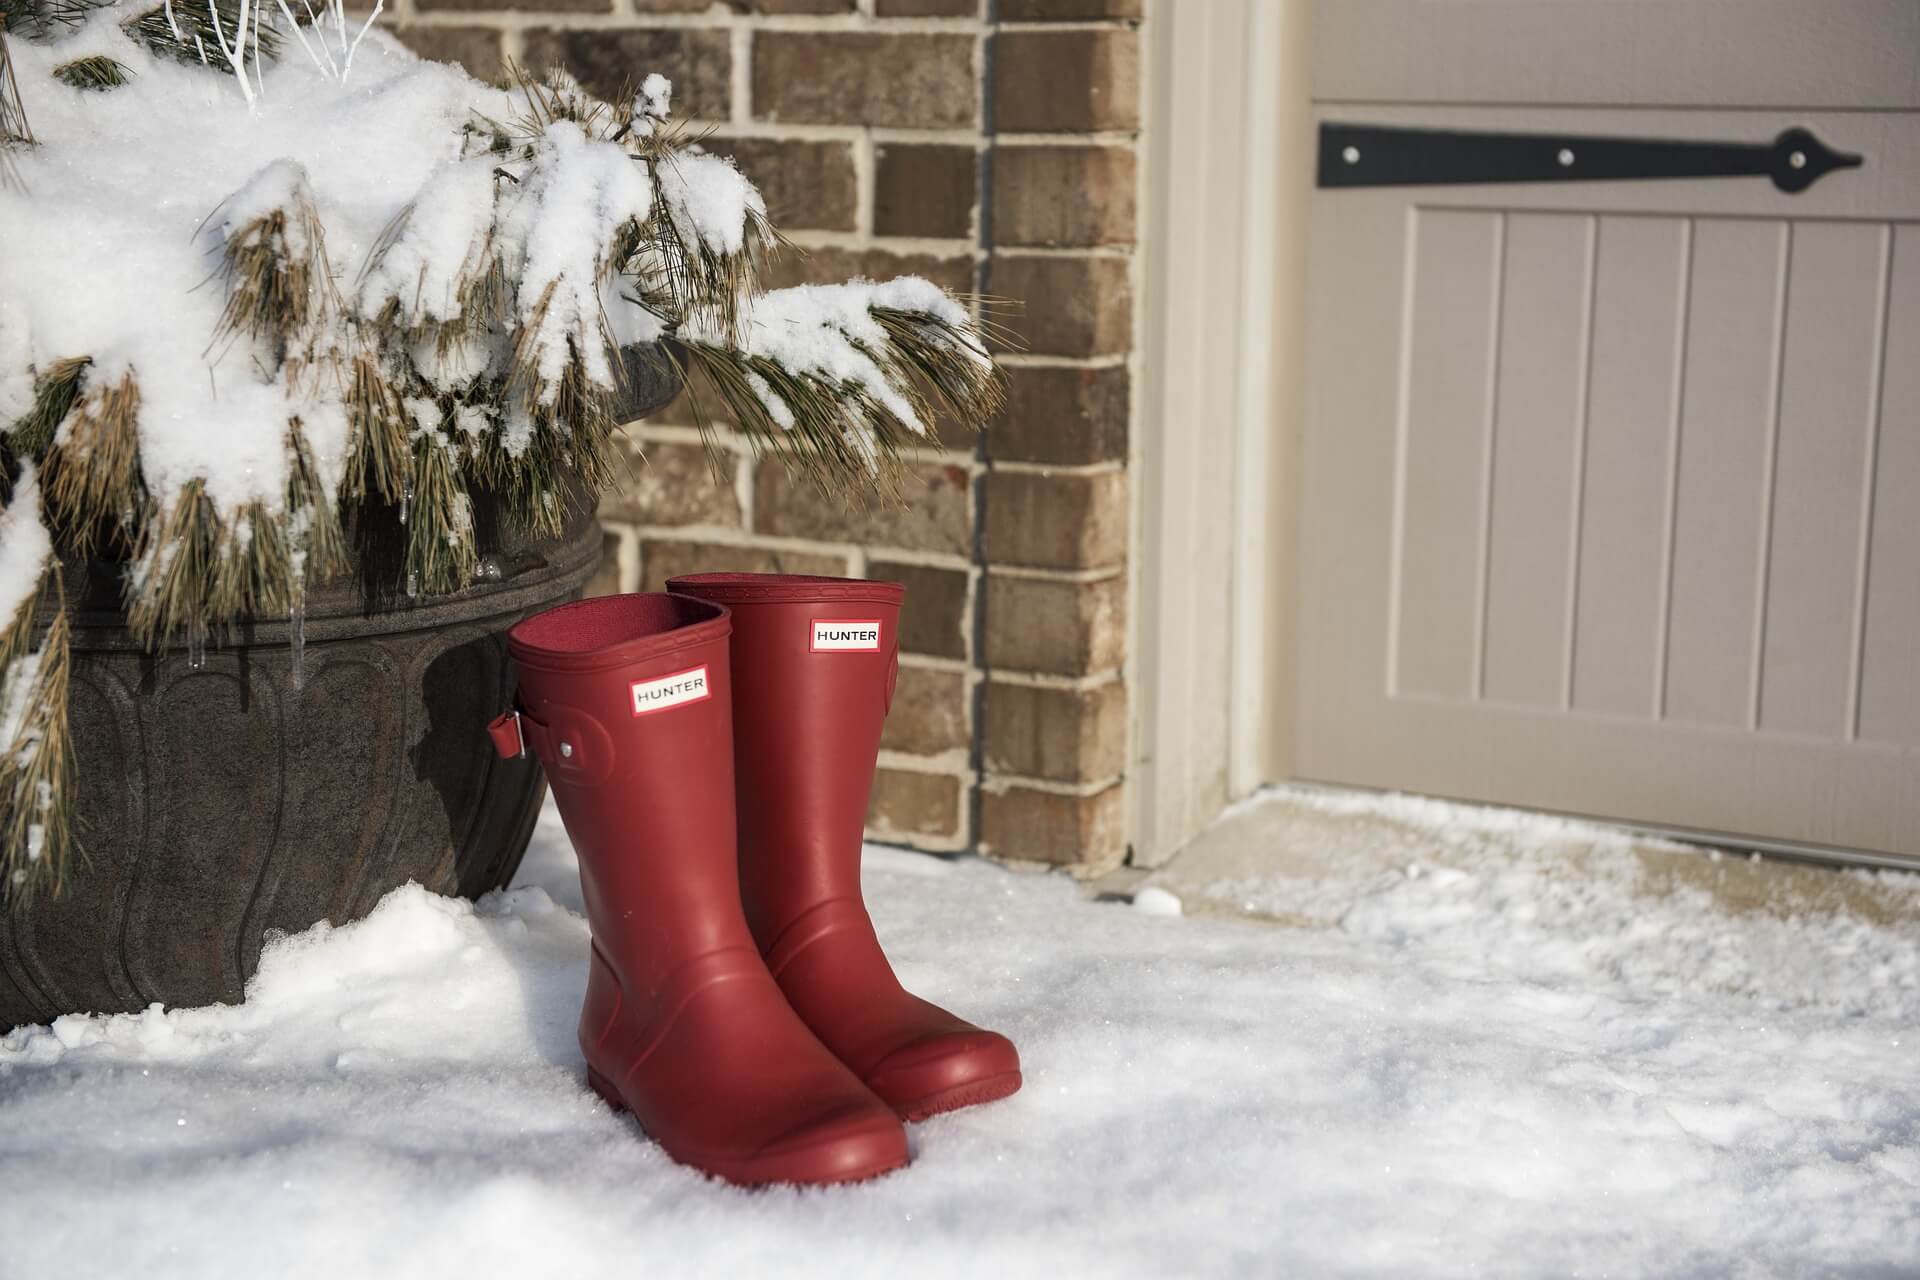 Wellington boots outside a door in the snow